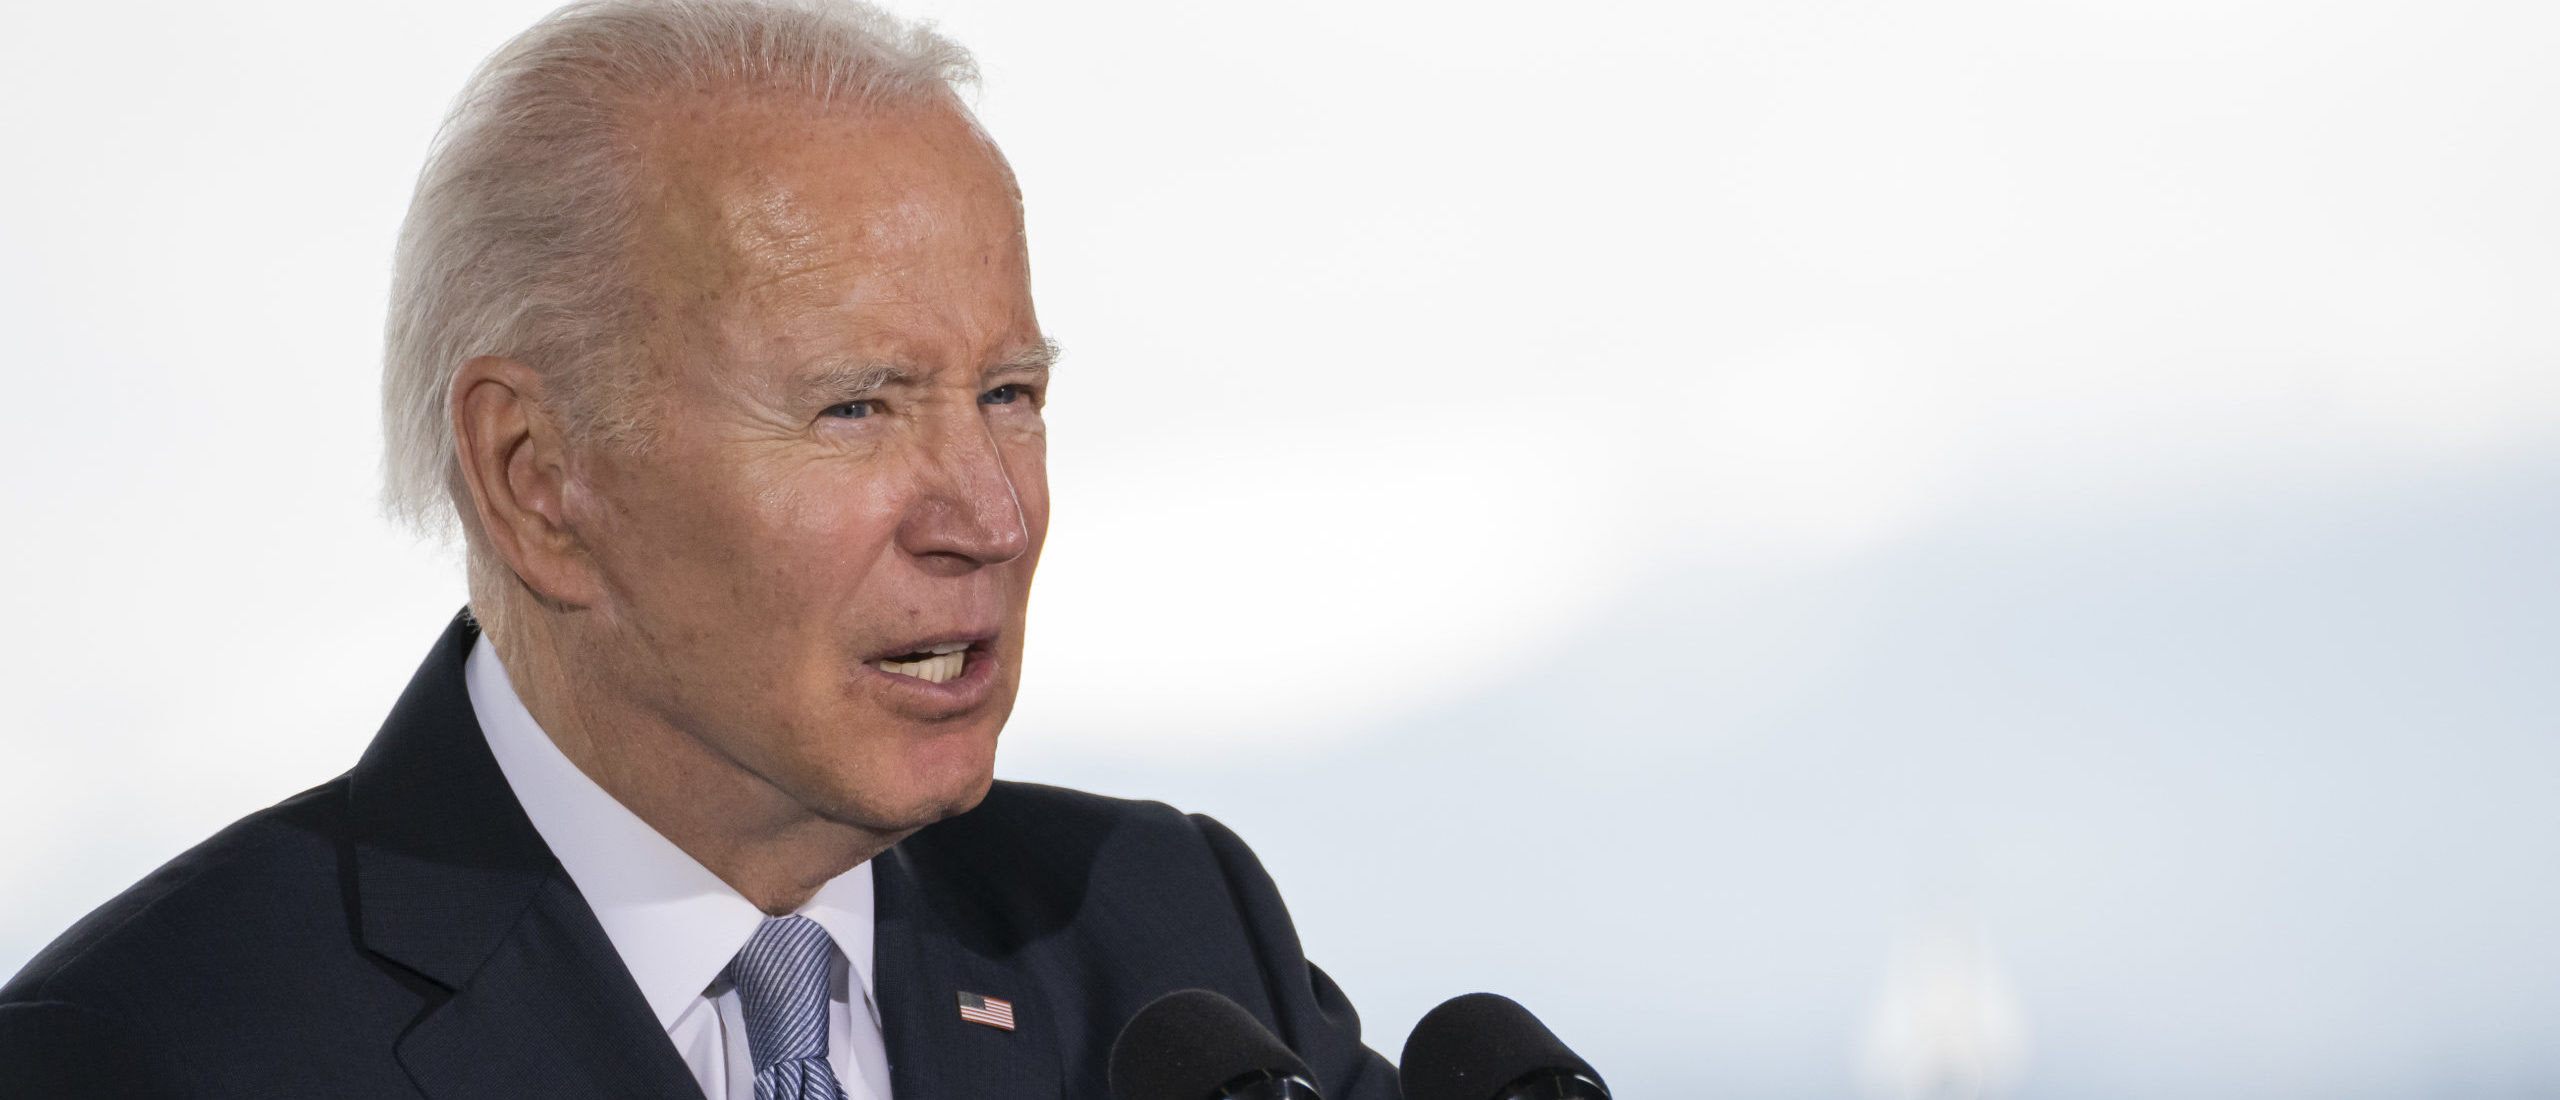 Biden Admin Mulls Environmental Regs That Farmers Say Could Crush Agriculture Industry: REPORT